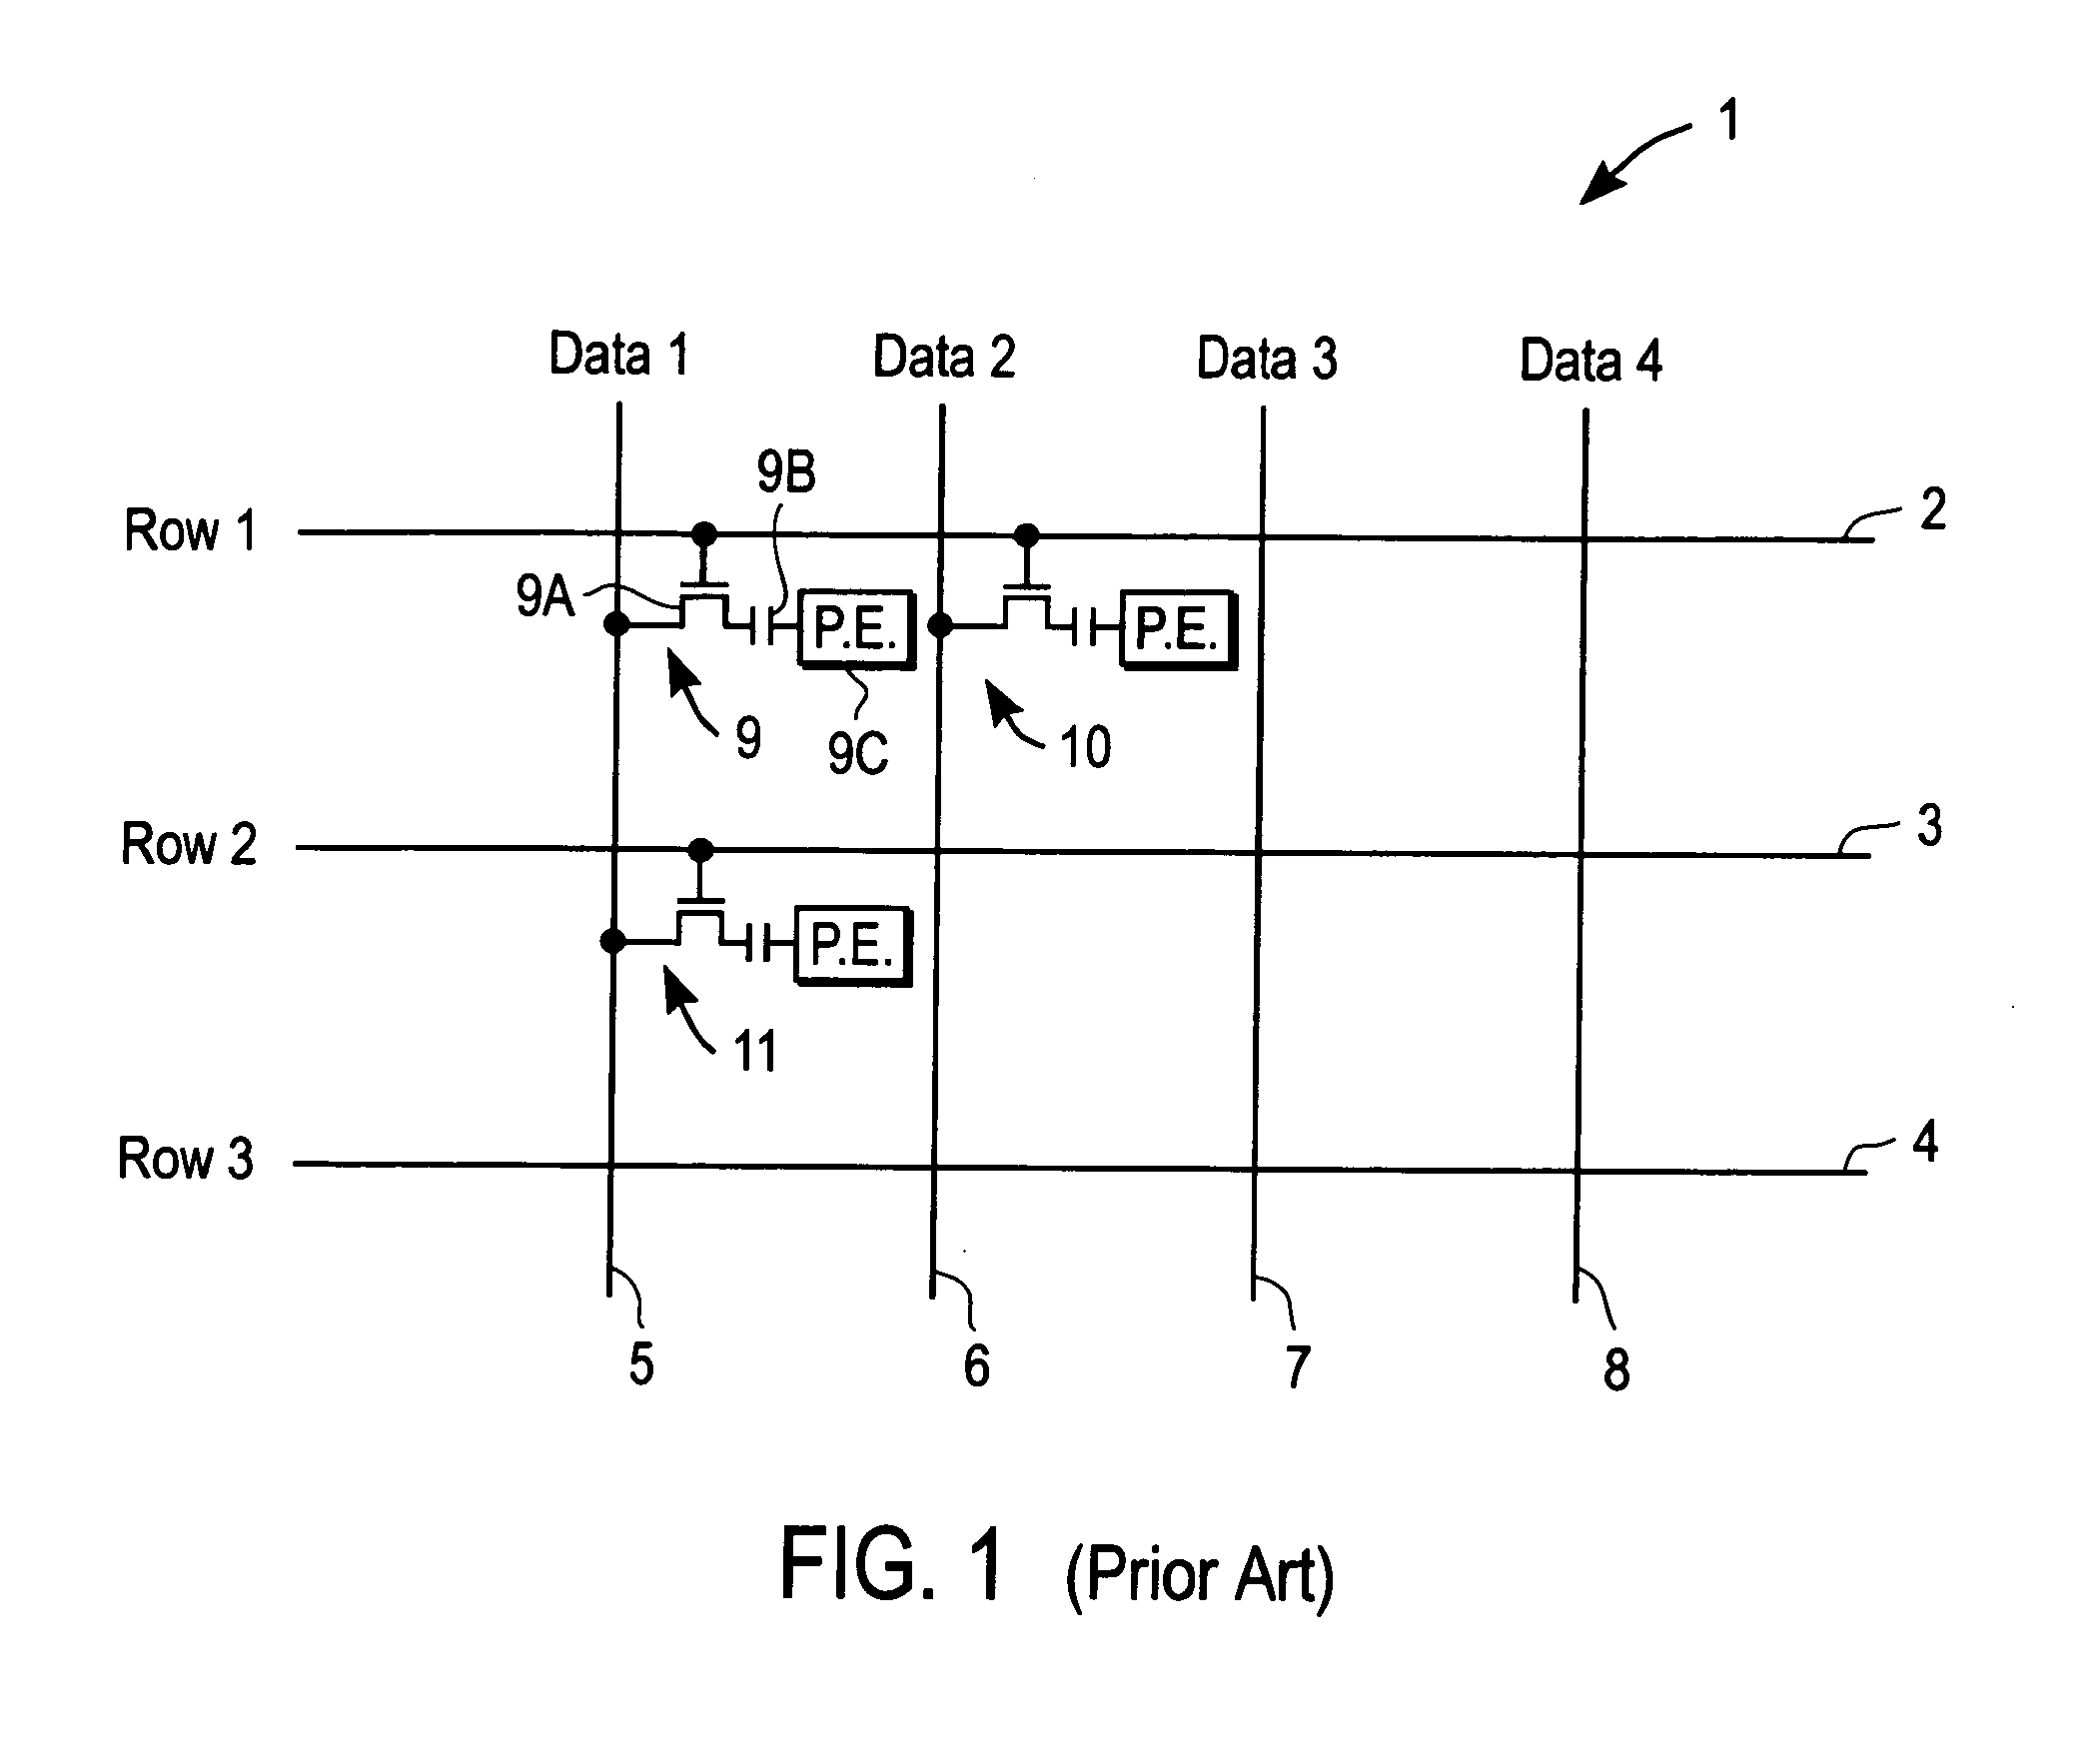 Display devices and integrated circuits